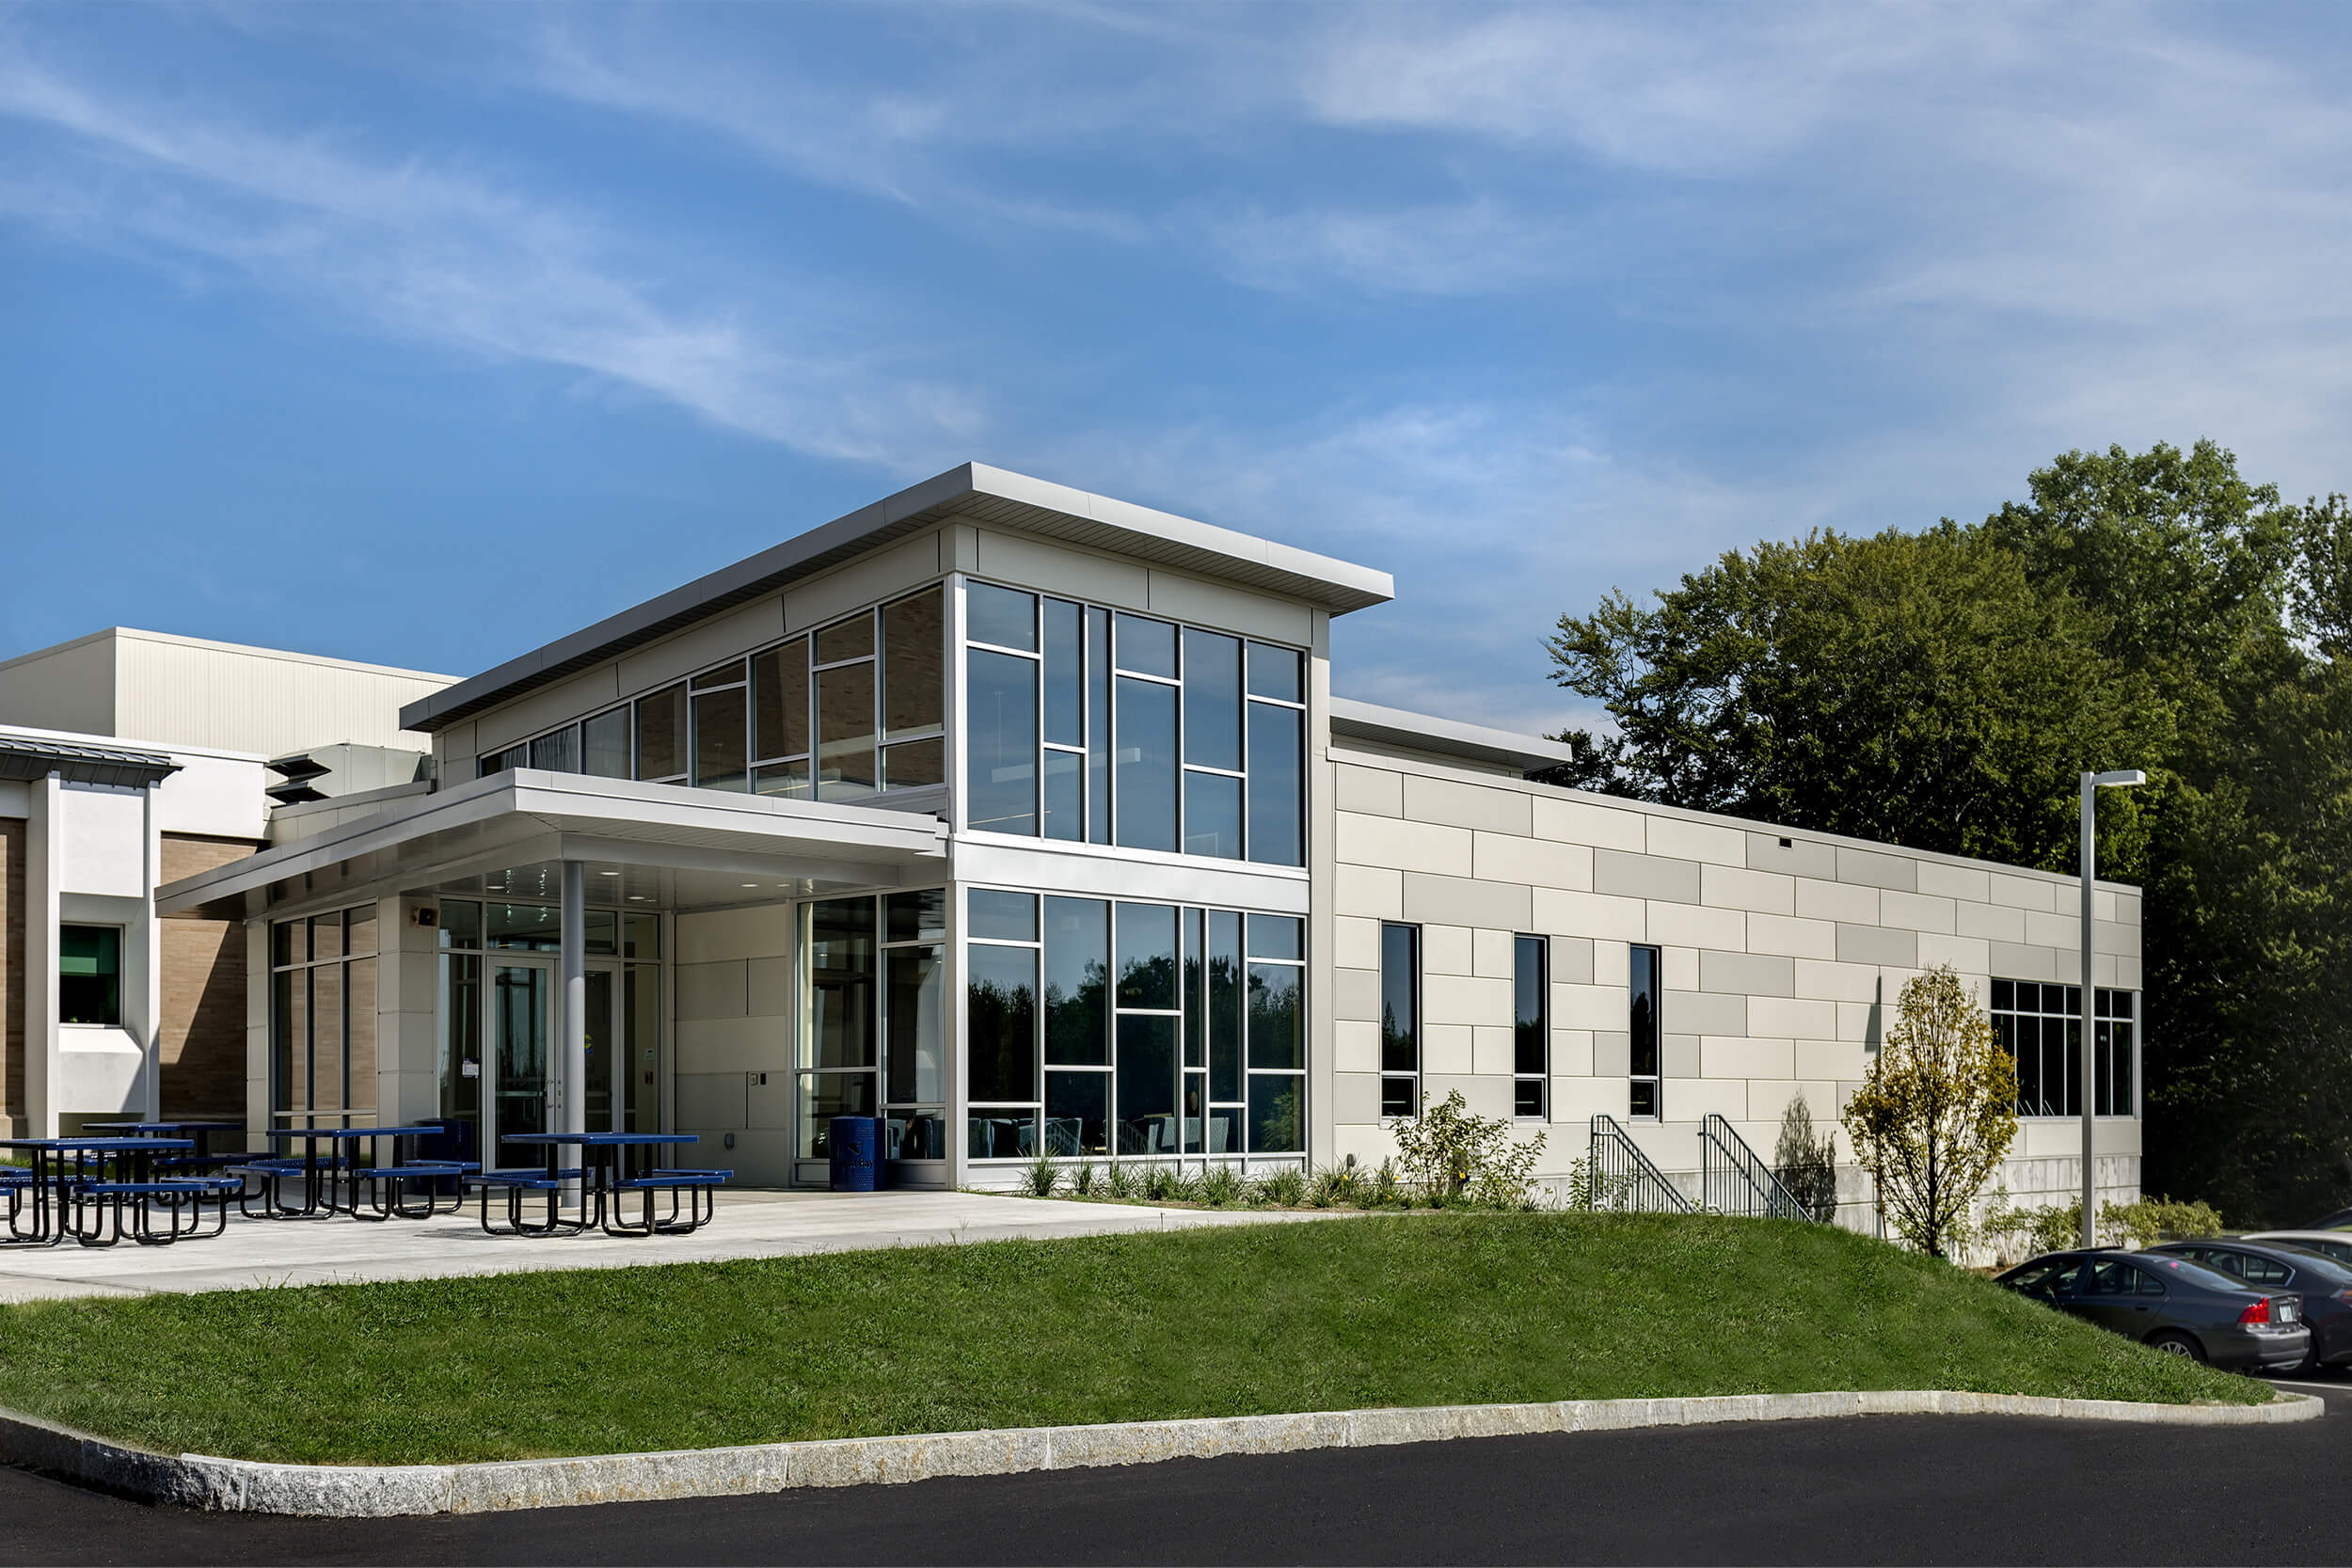 An exterior view of the student success center at Great Bay Community College. The building is a low grey stone building with two floors, open glass windows/walls on the exterior entrance, and a small courtyard with blue metal picnic tables.